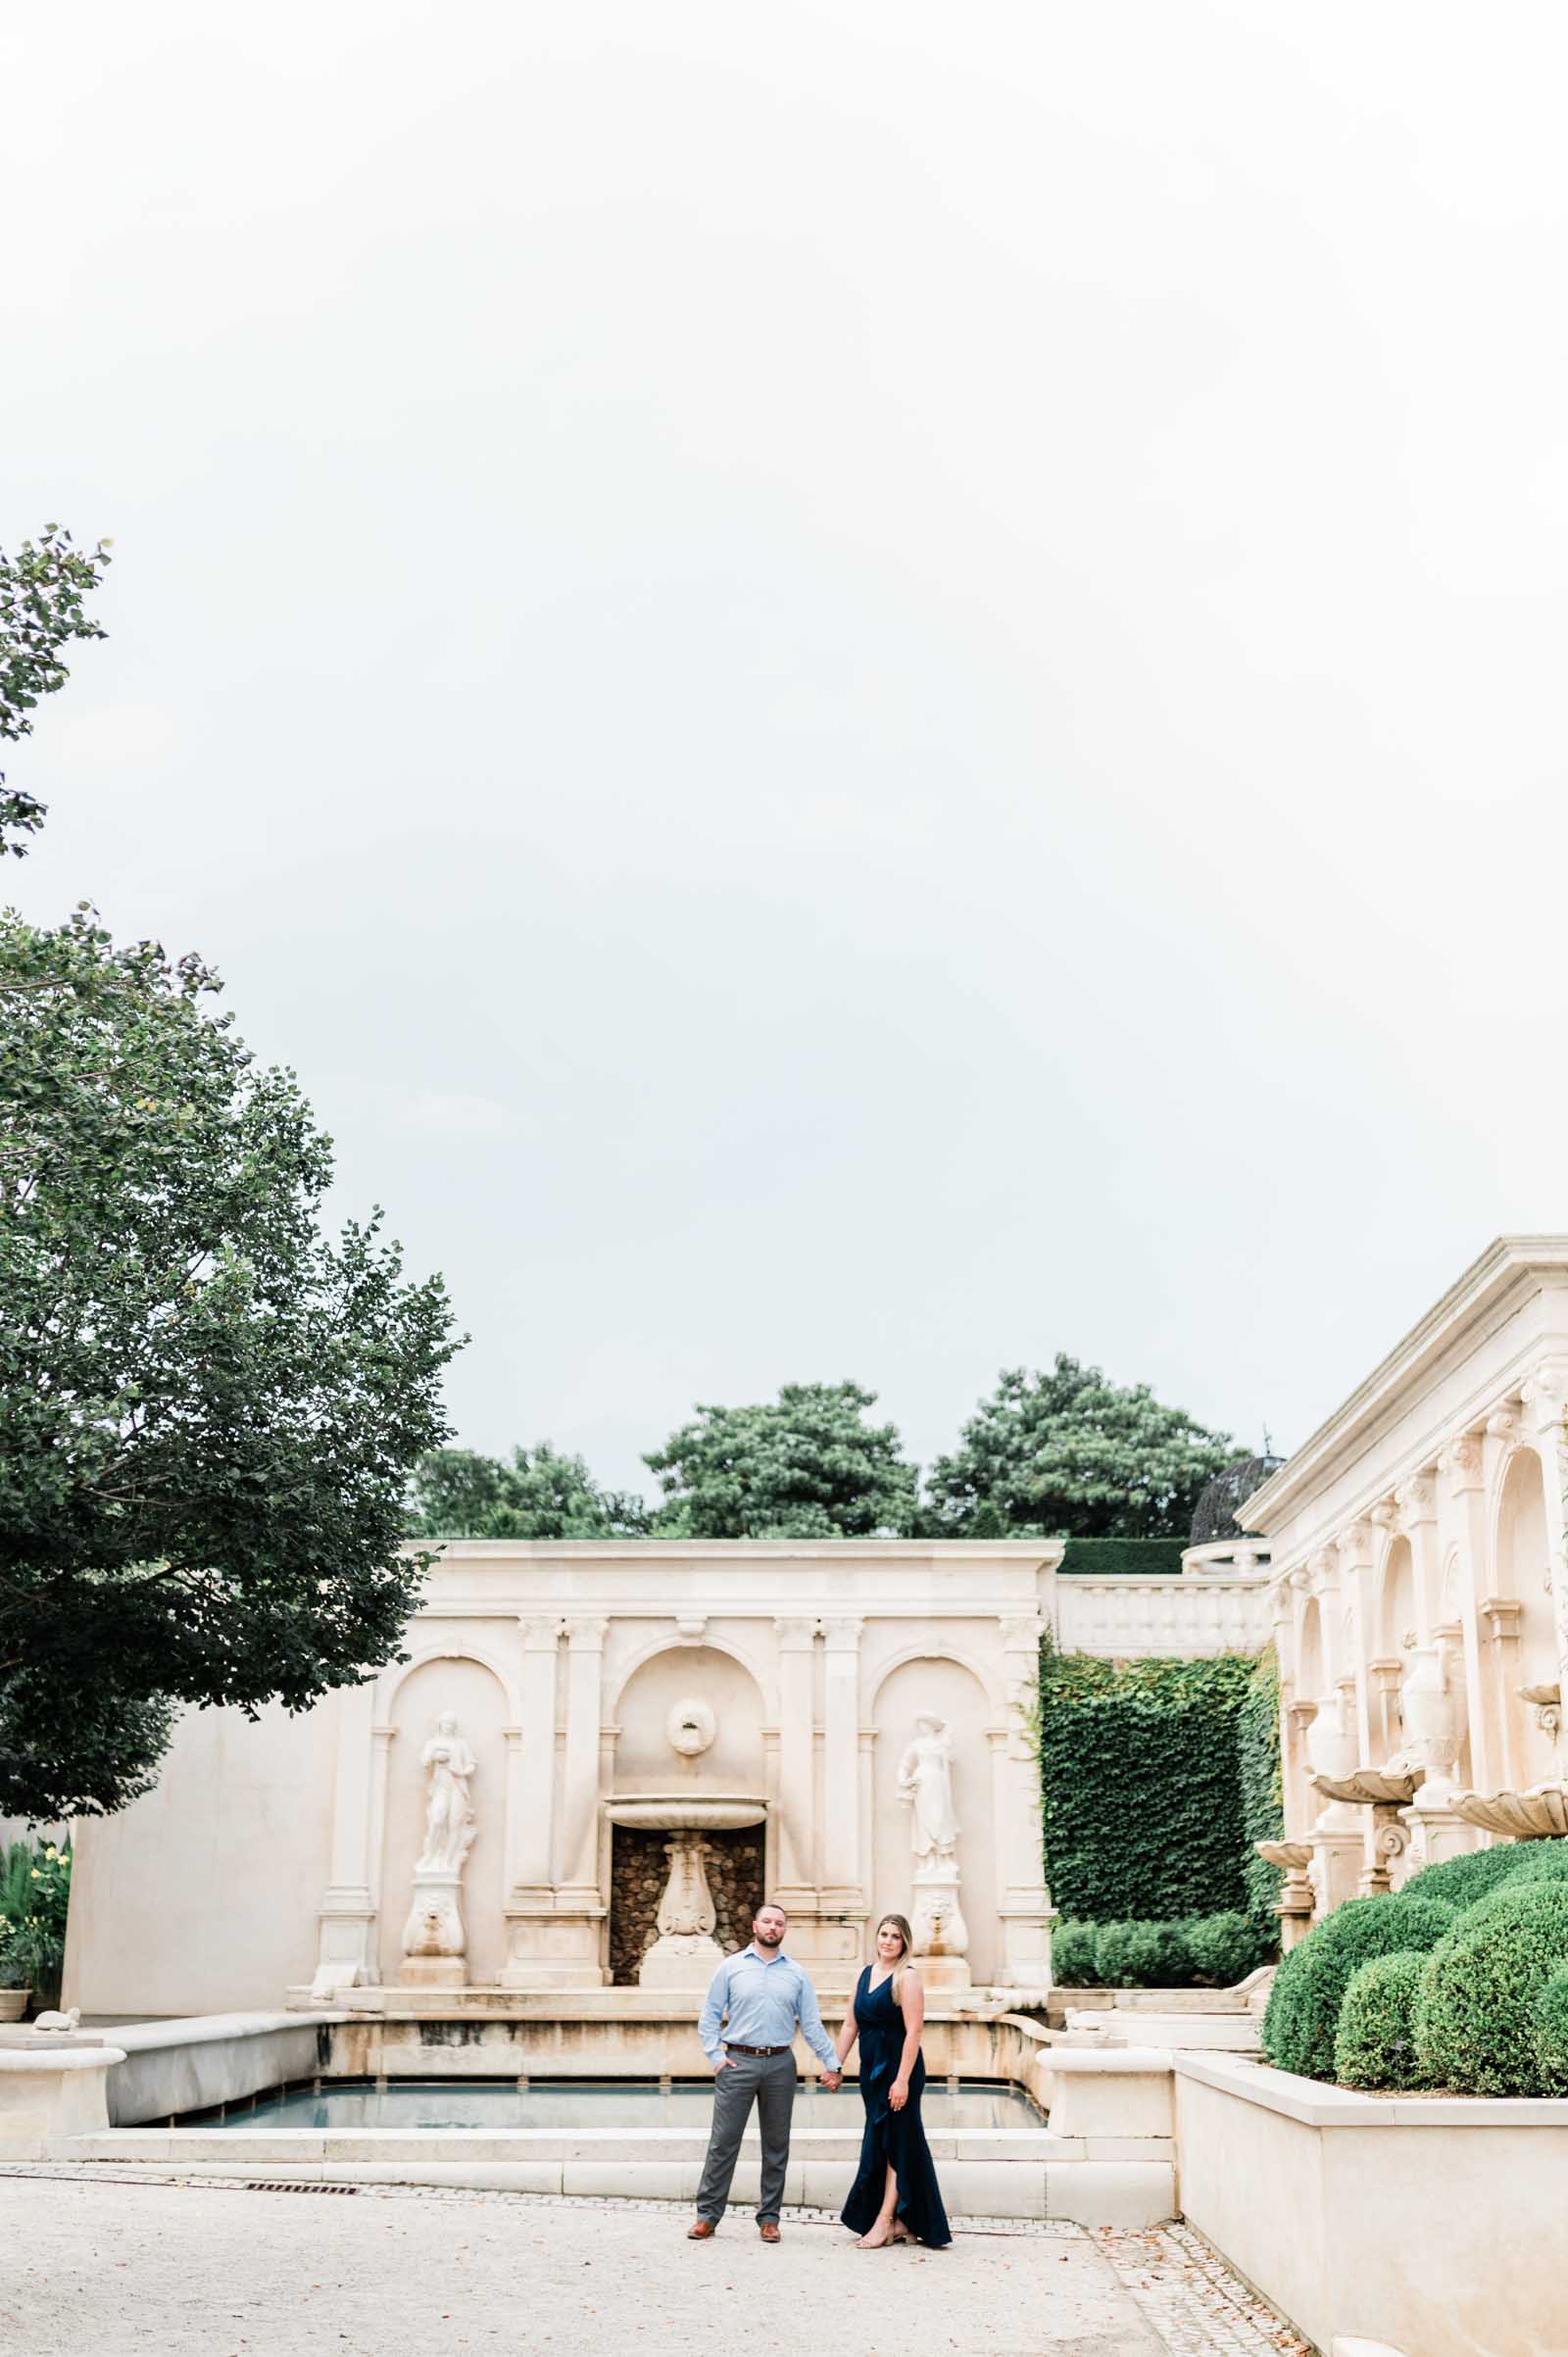 Elegant engagement photo at Longwood Gardens featuring the picturesque botanical backdrop in Philadelphia.